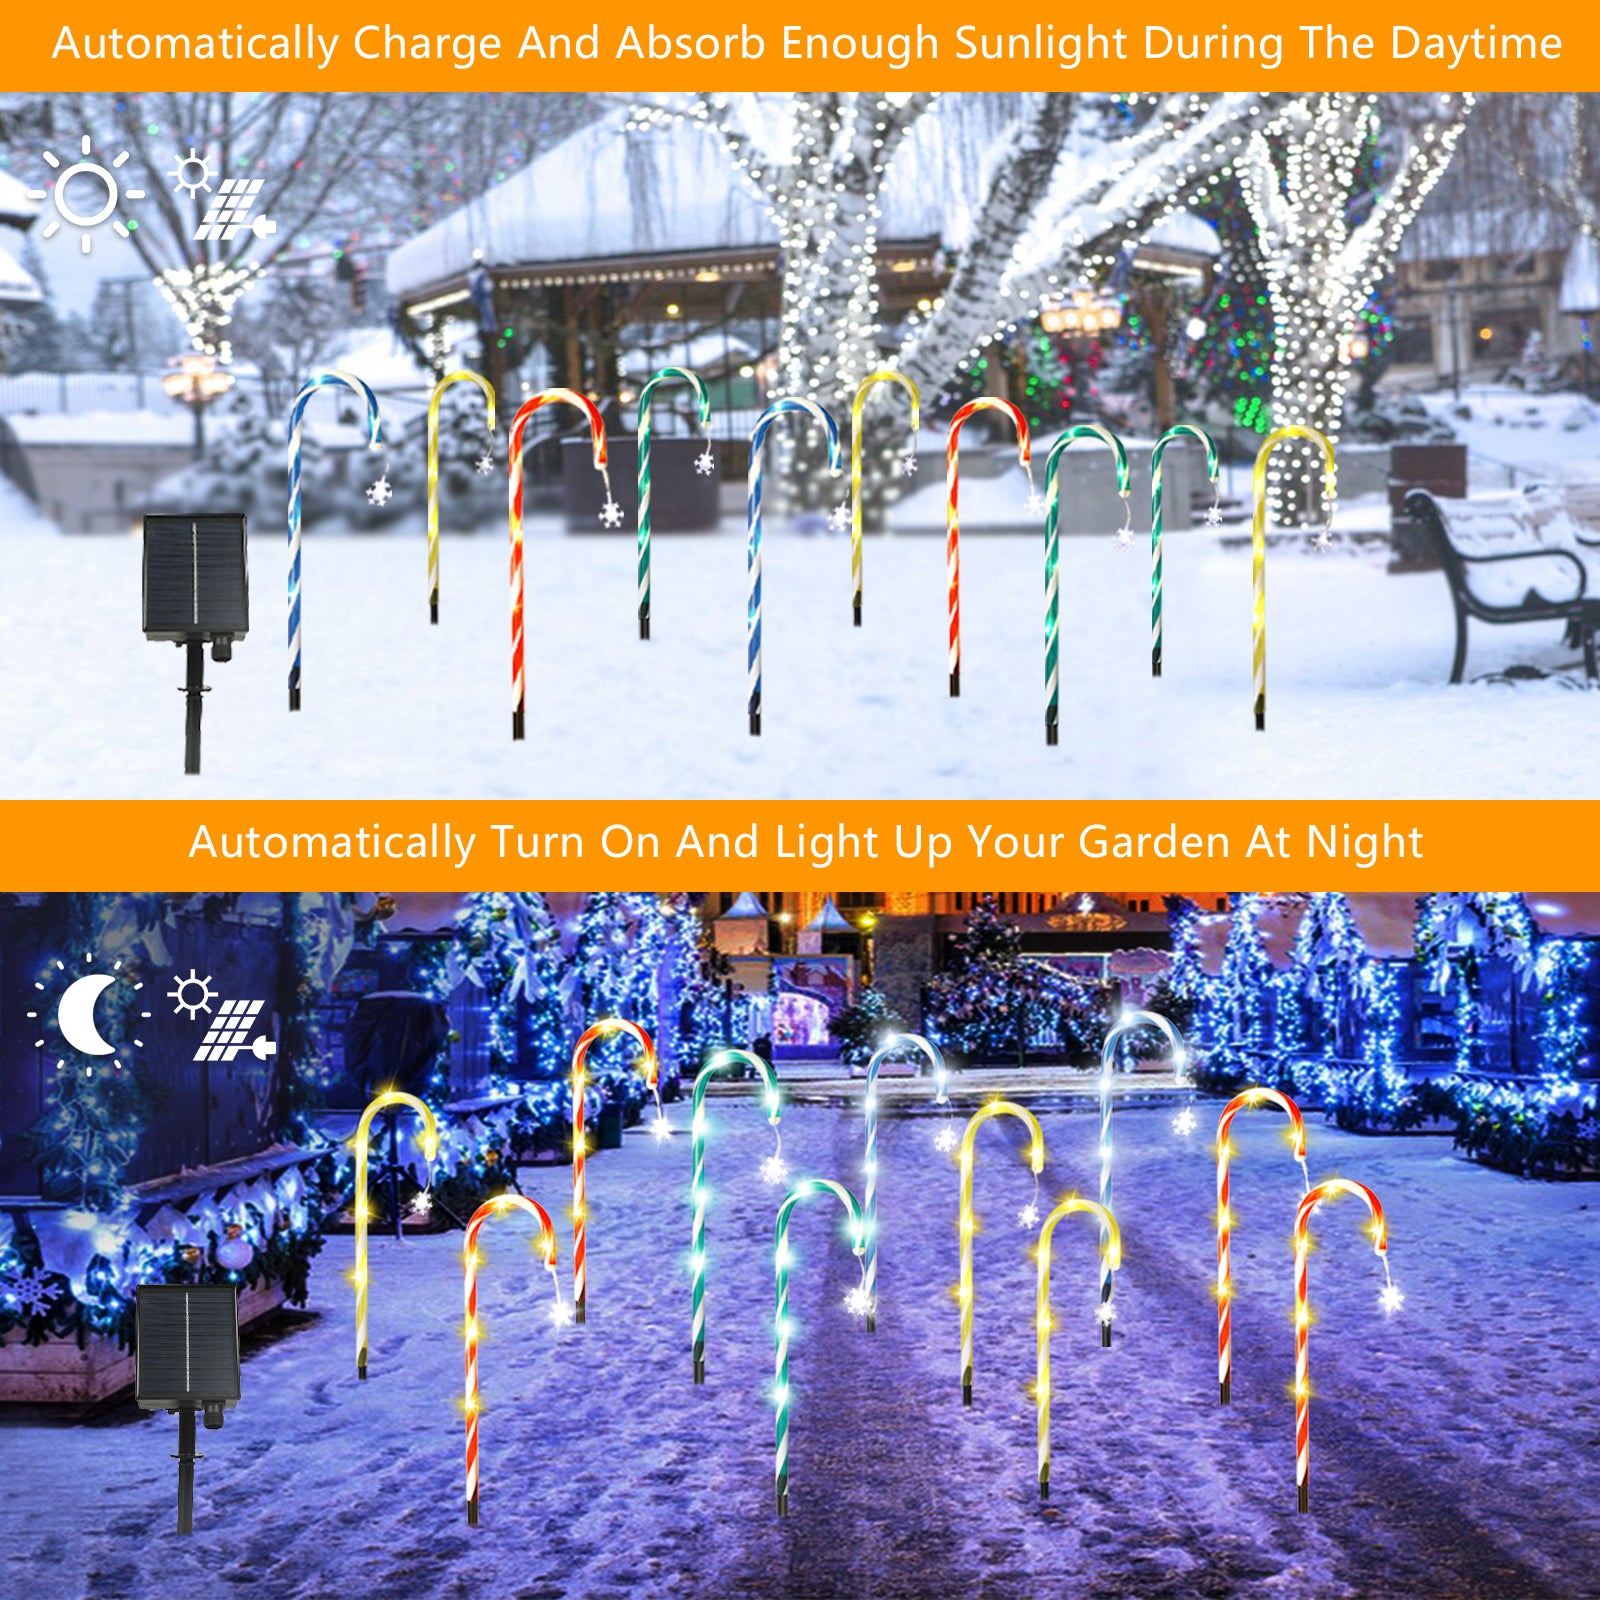 Solar Candy Cane Pathway Lights, 8 Pack Christmas Garden Lights Outdoor with Hanging Snowflake